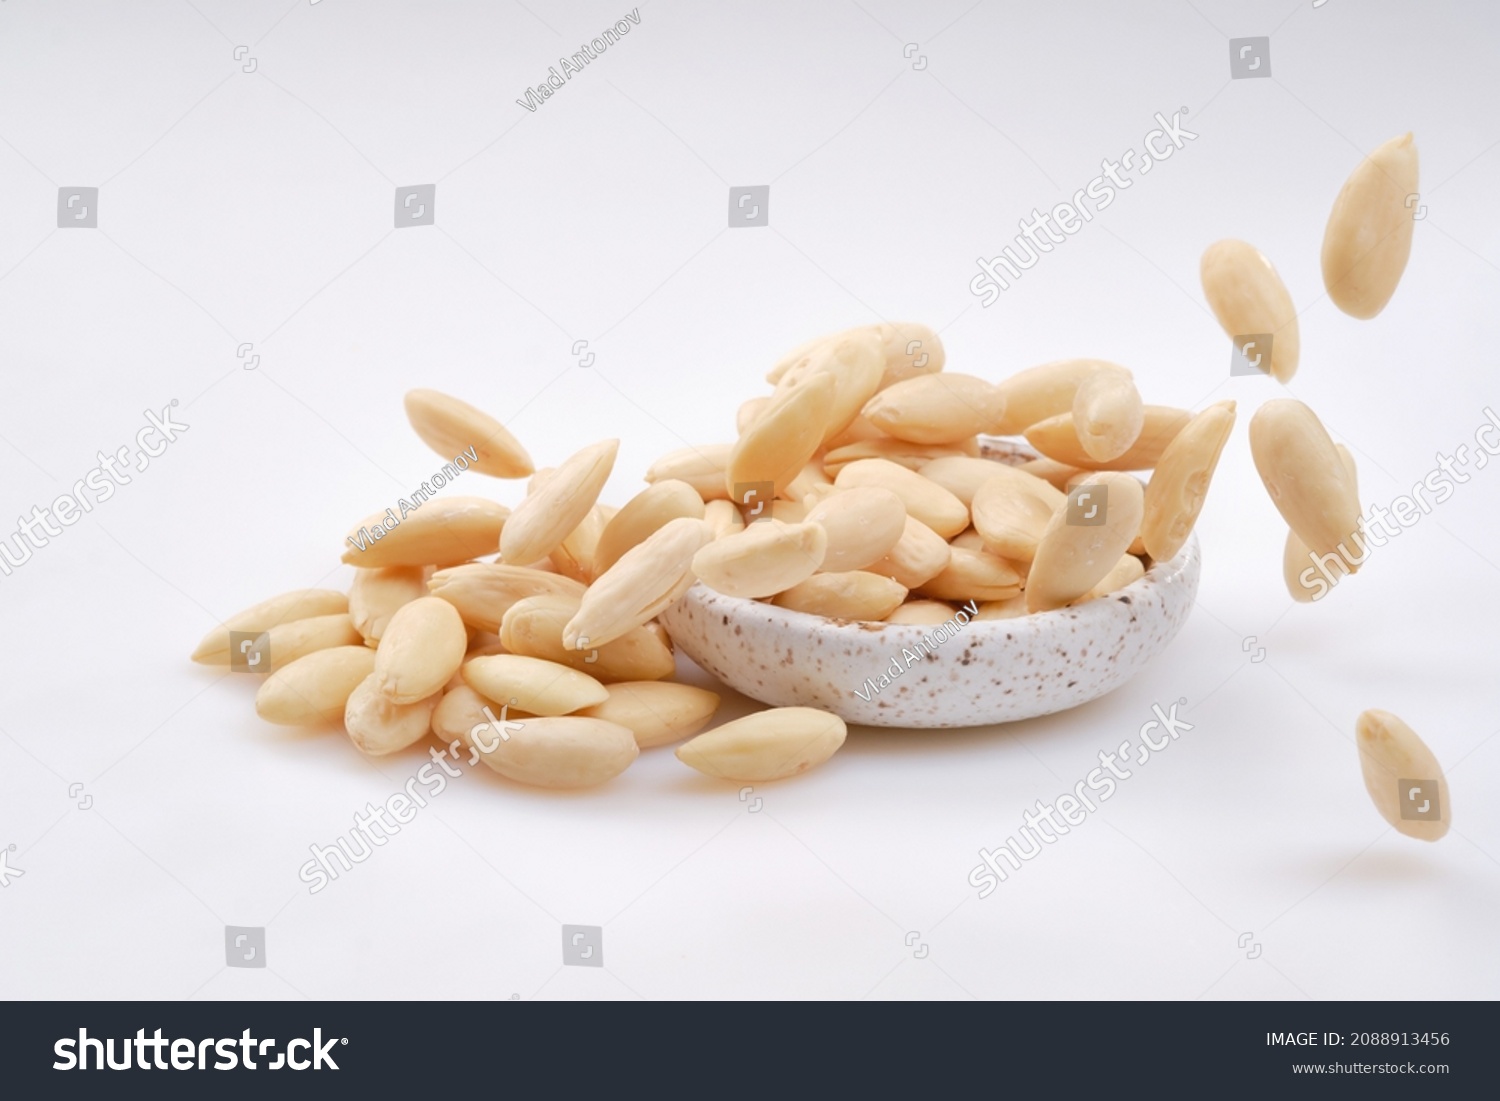 Pile of Peeled  Almonds. Falling Blanched Almonds. Healthy White Almond on White Background. Shallow depth of field #2088913456